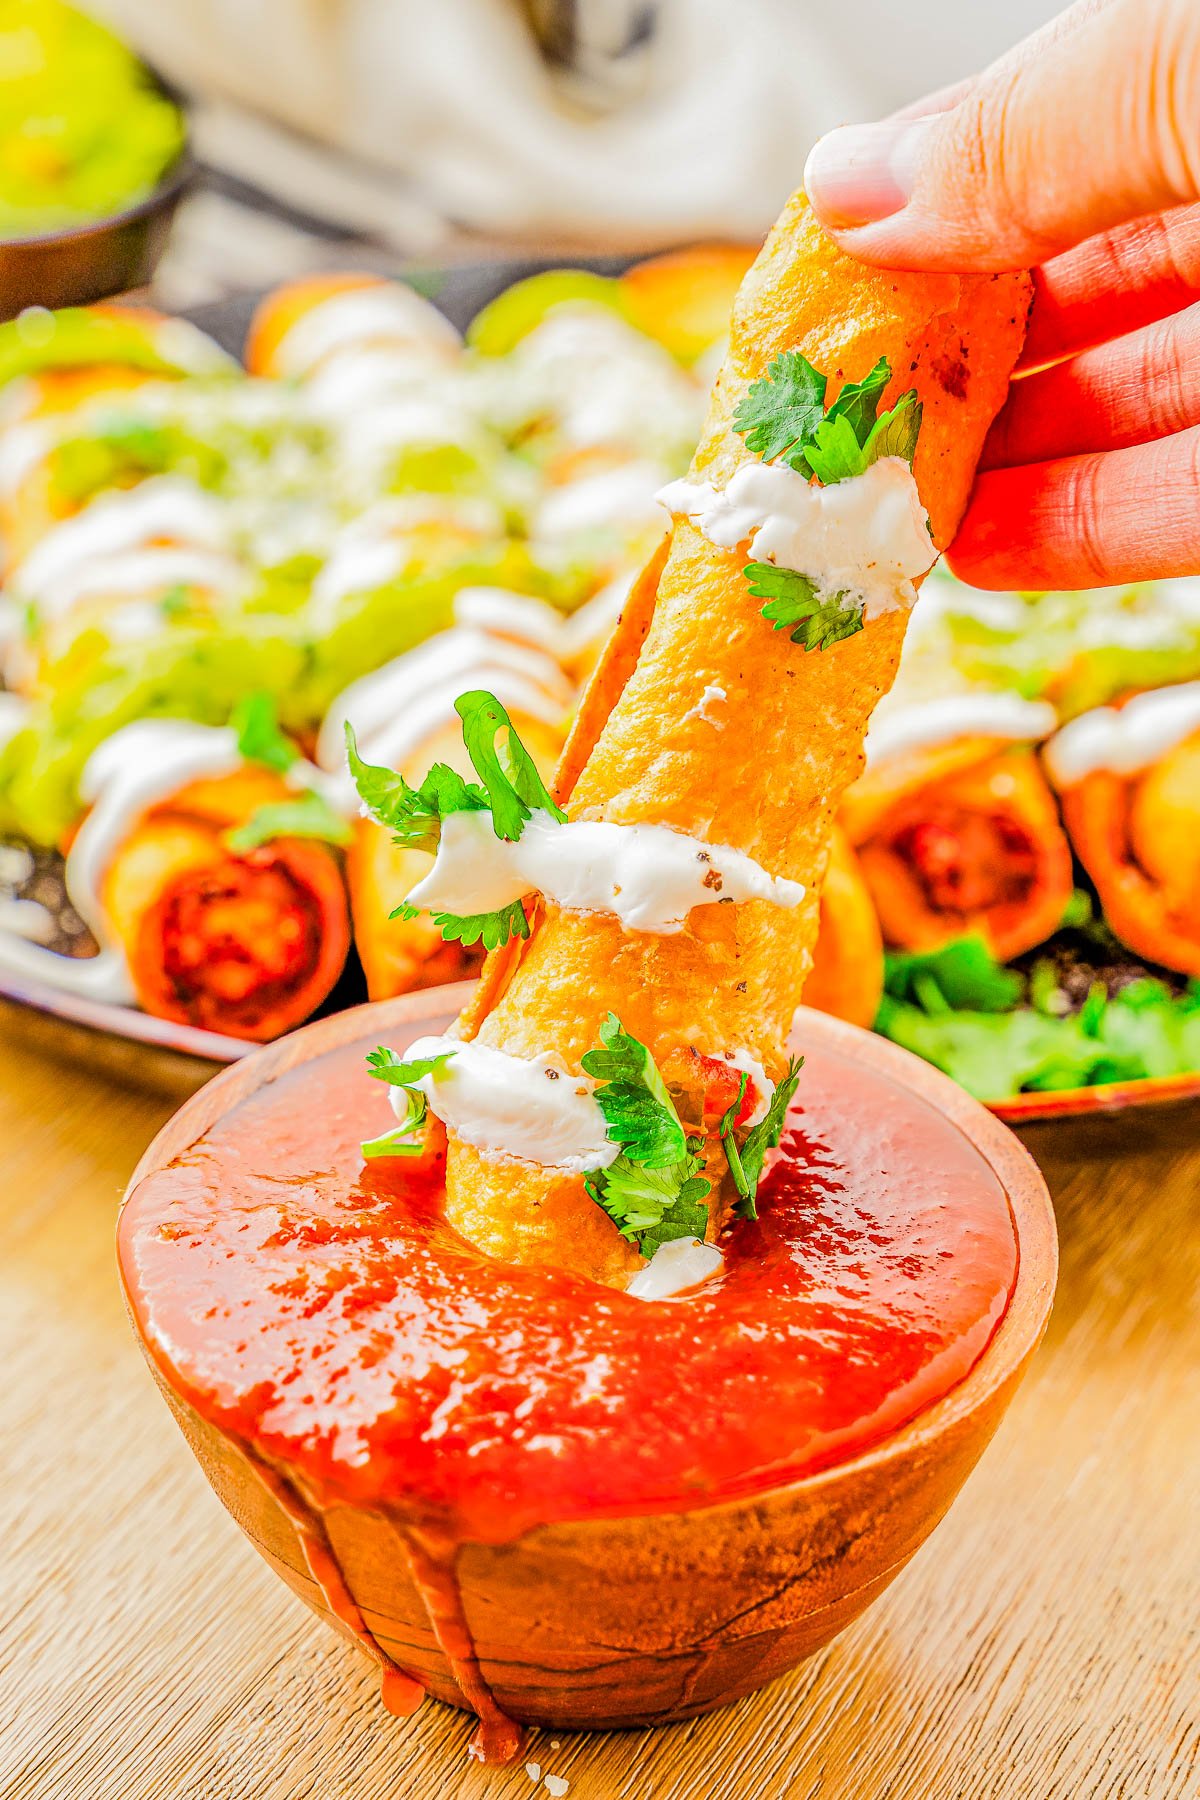 A person dipping a taquito into a bowl of red salsa, garnished with sour cream and cilantro, with more taquitos in the background.